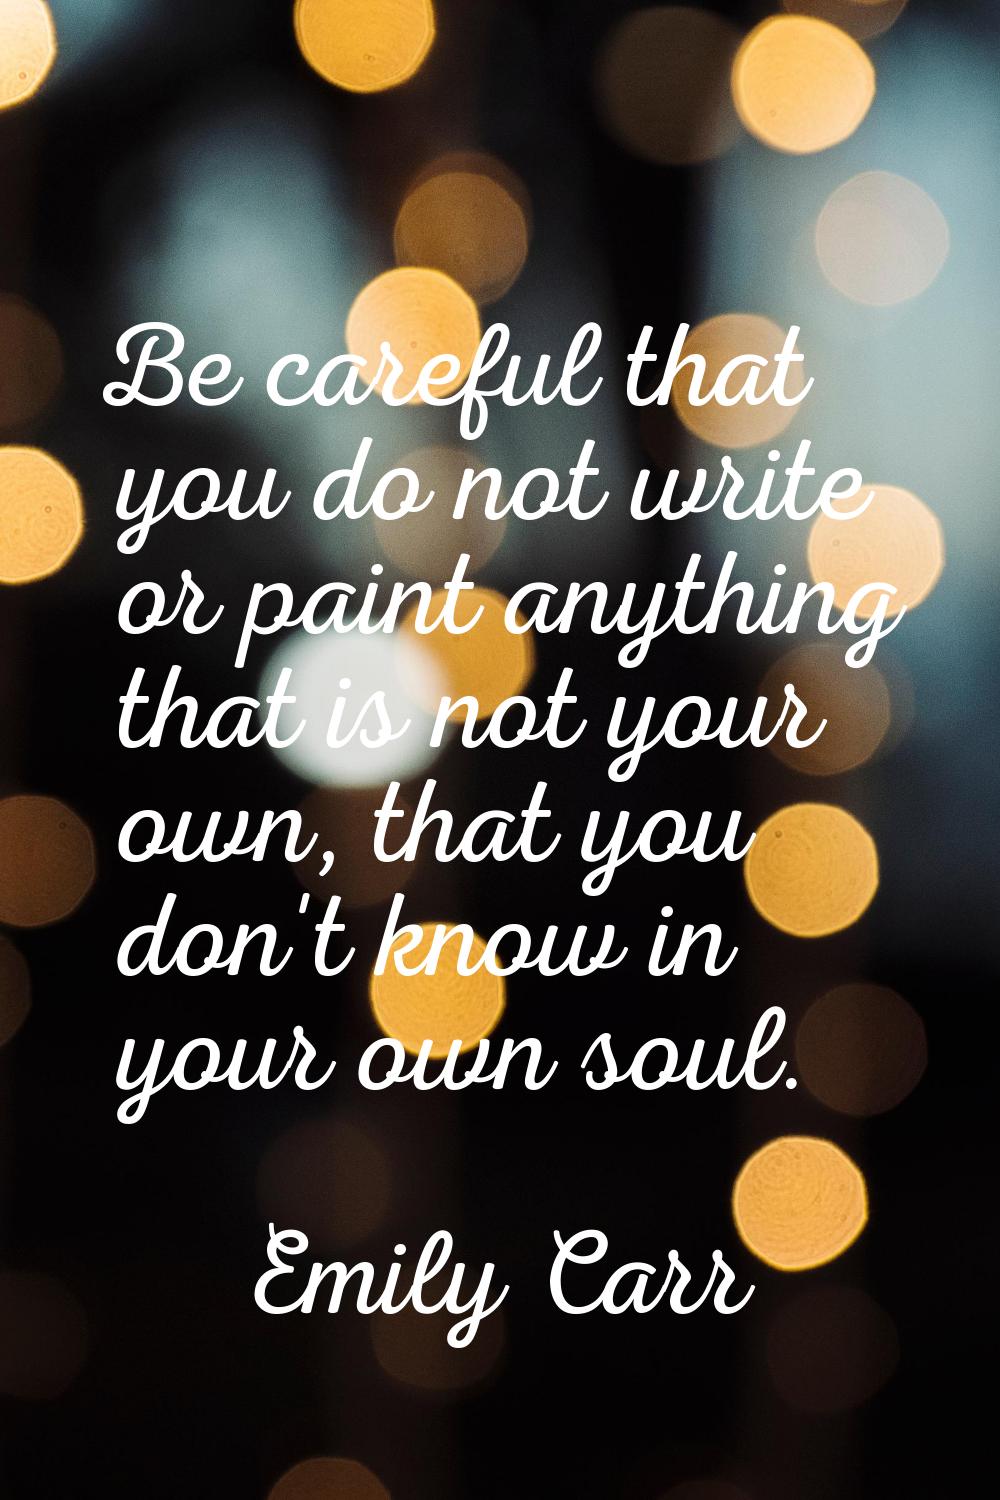 Be careful that you do not write or paint anything that is not your own, that you don't know in you